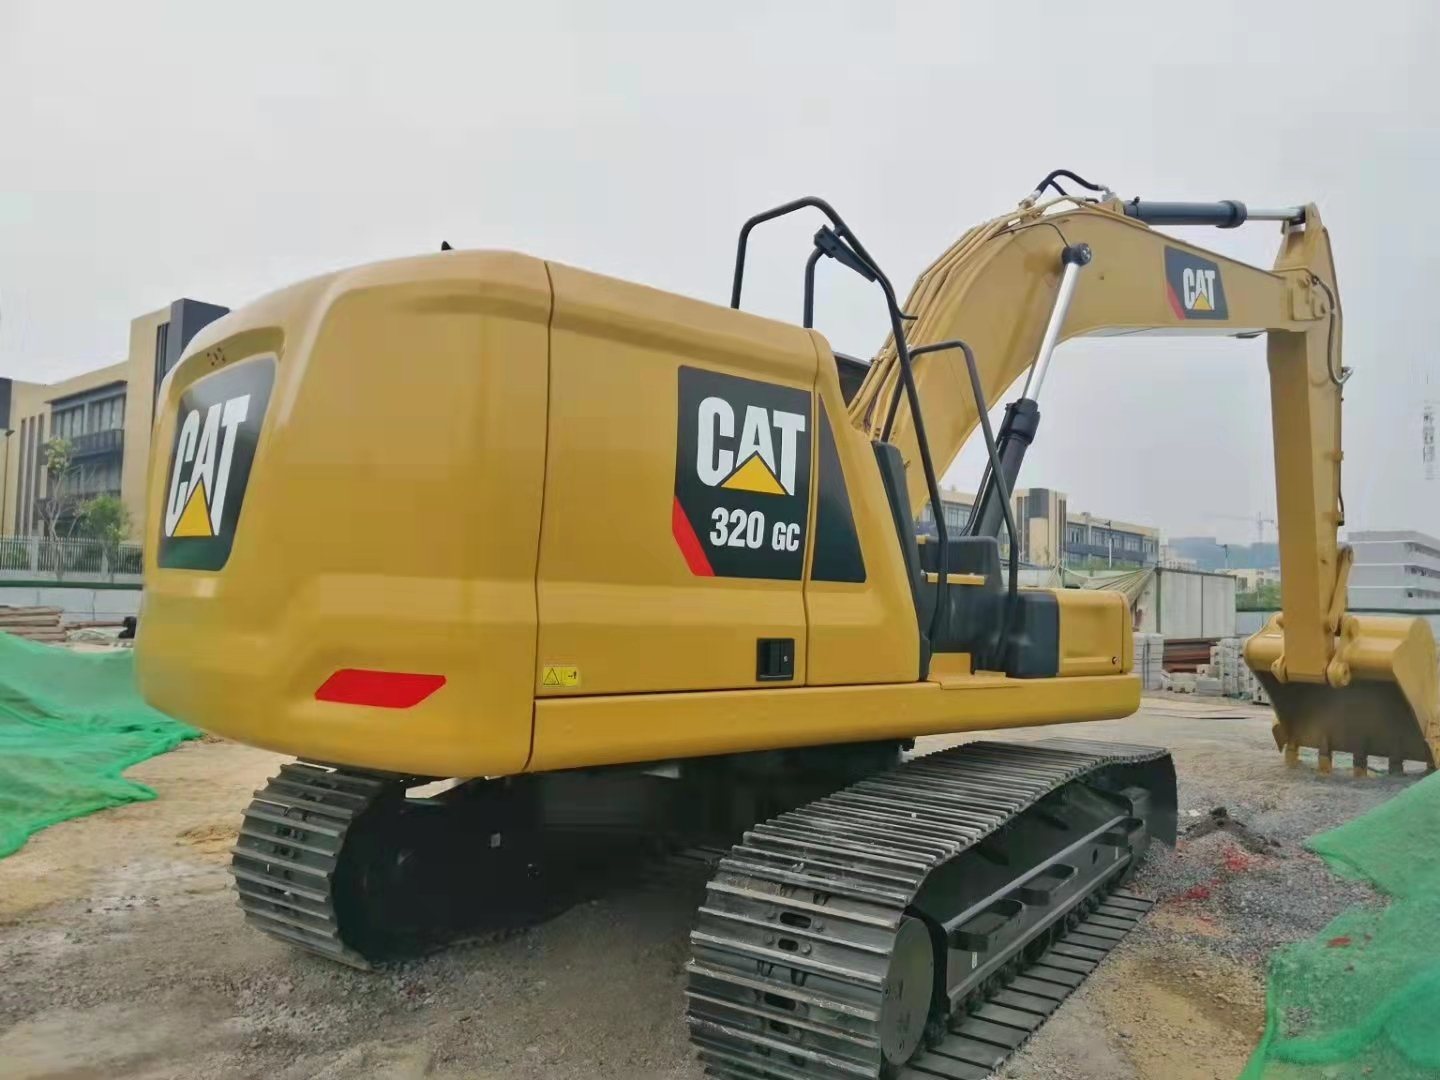 Construction Equipment Factory Price China Top Brand with Best Quality 20t Brand New 320gc Excavators